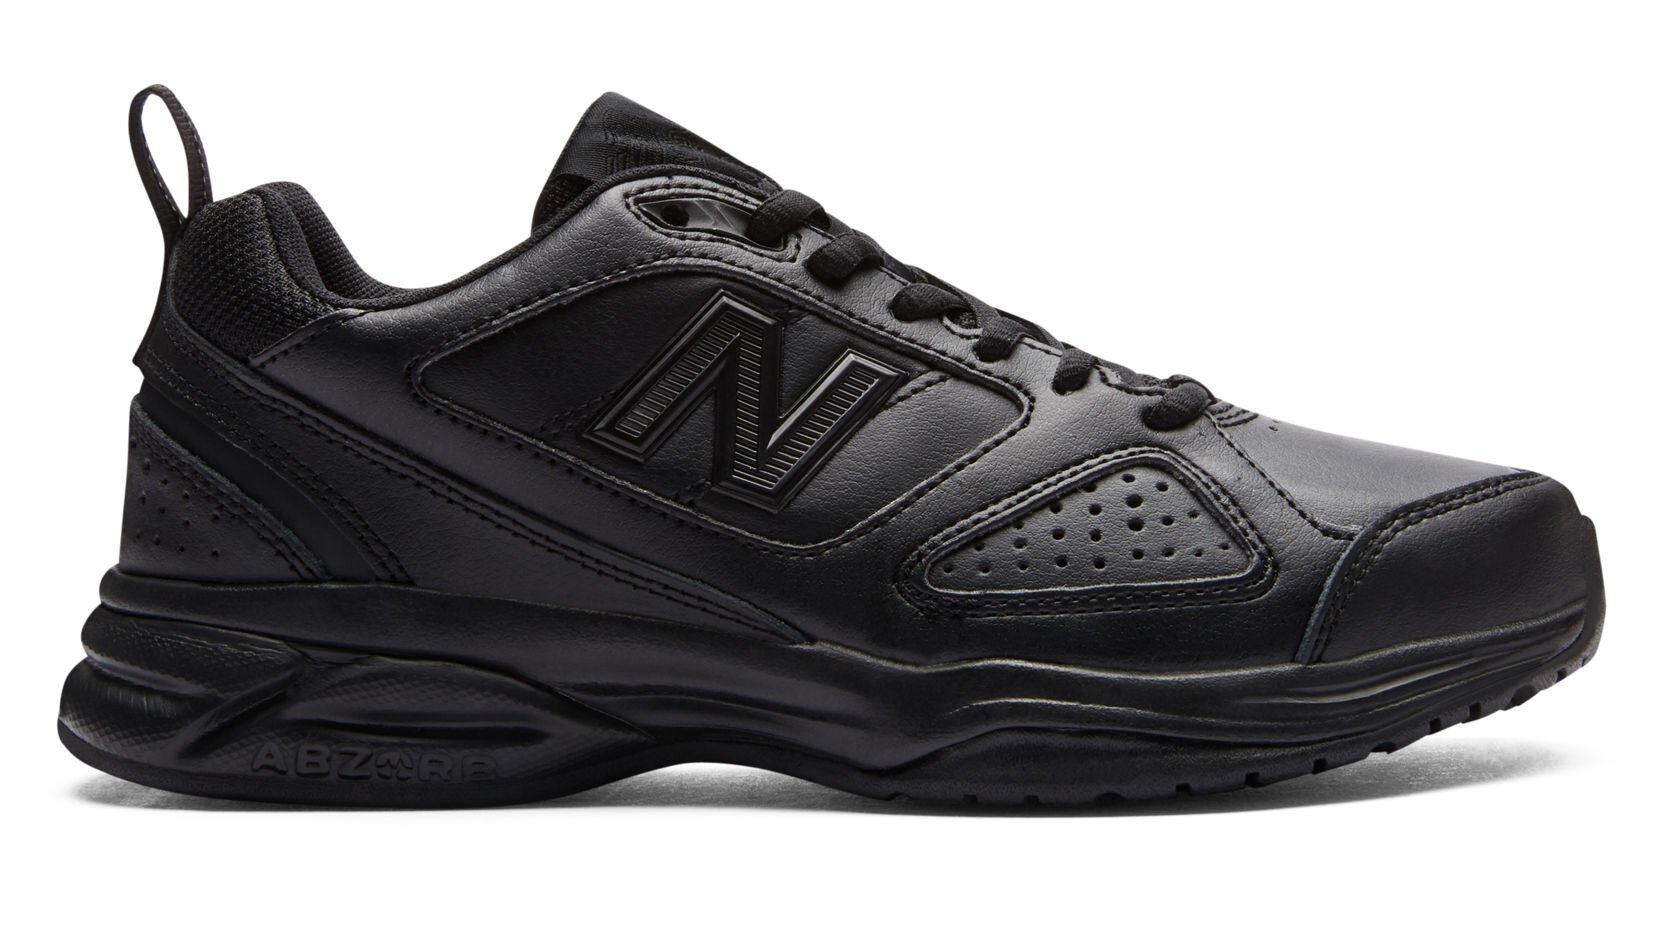 New Balance WX 624 (D Width) Womens Training Shoe - Buy - Ph: 1800-370-766 - AfterPay ZipPay Available!